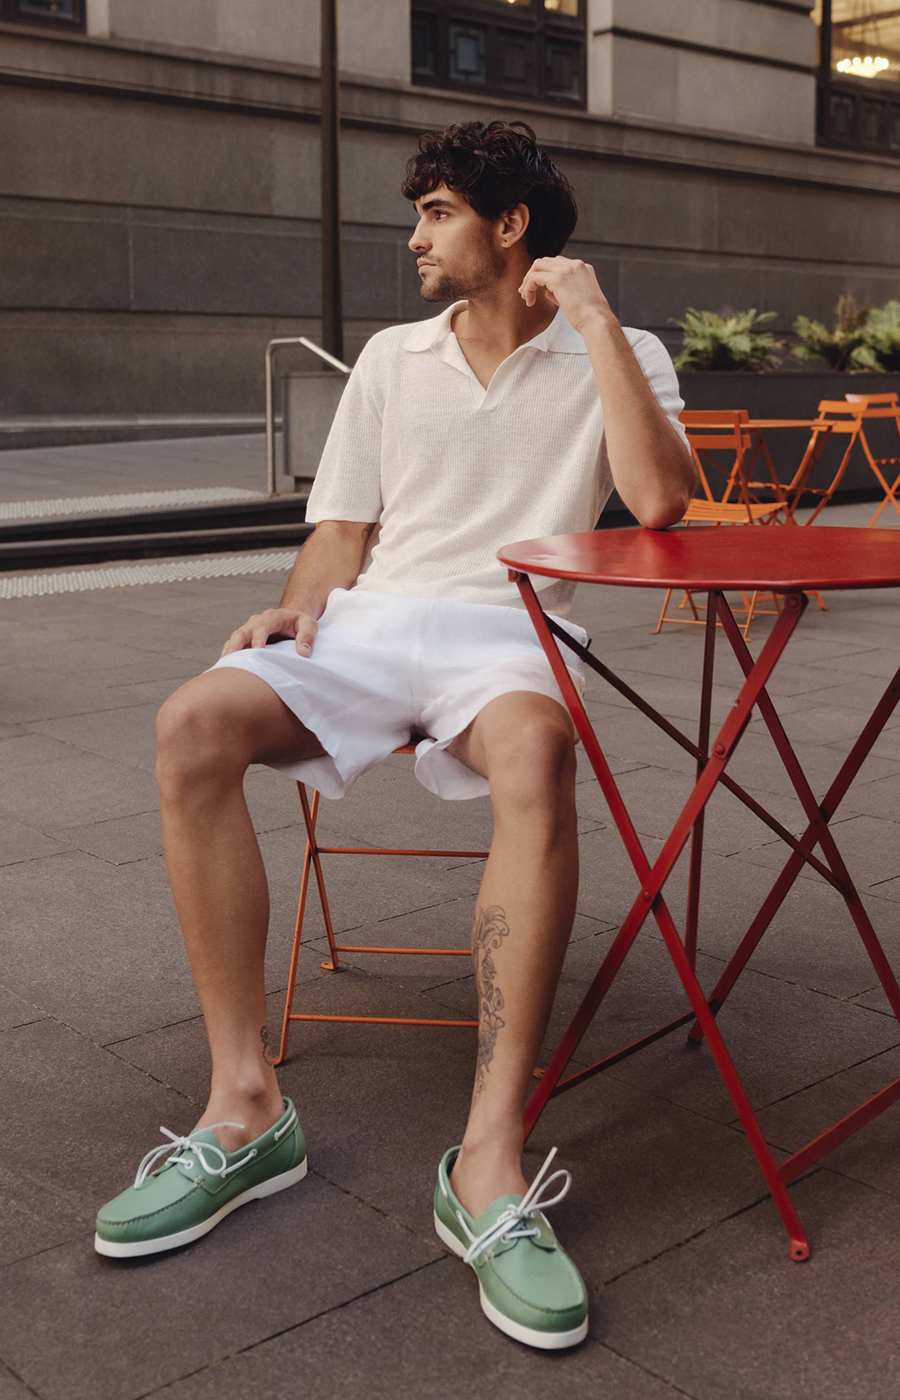 Beige linen shirt, white shorts, and green boat shoes outfit